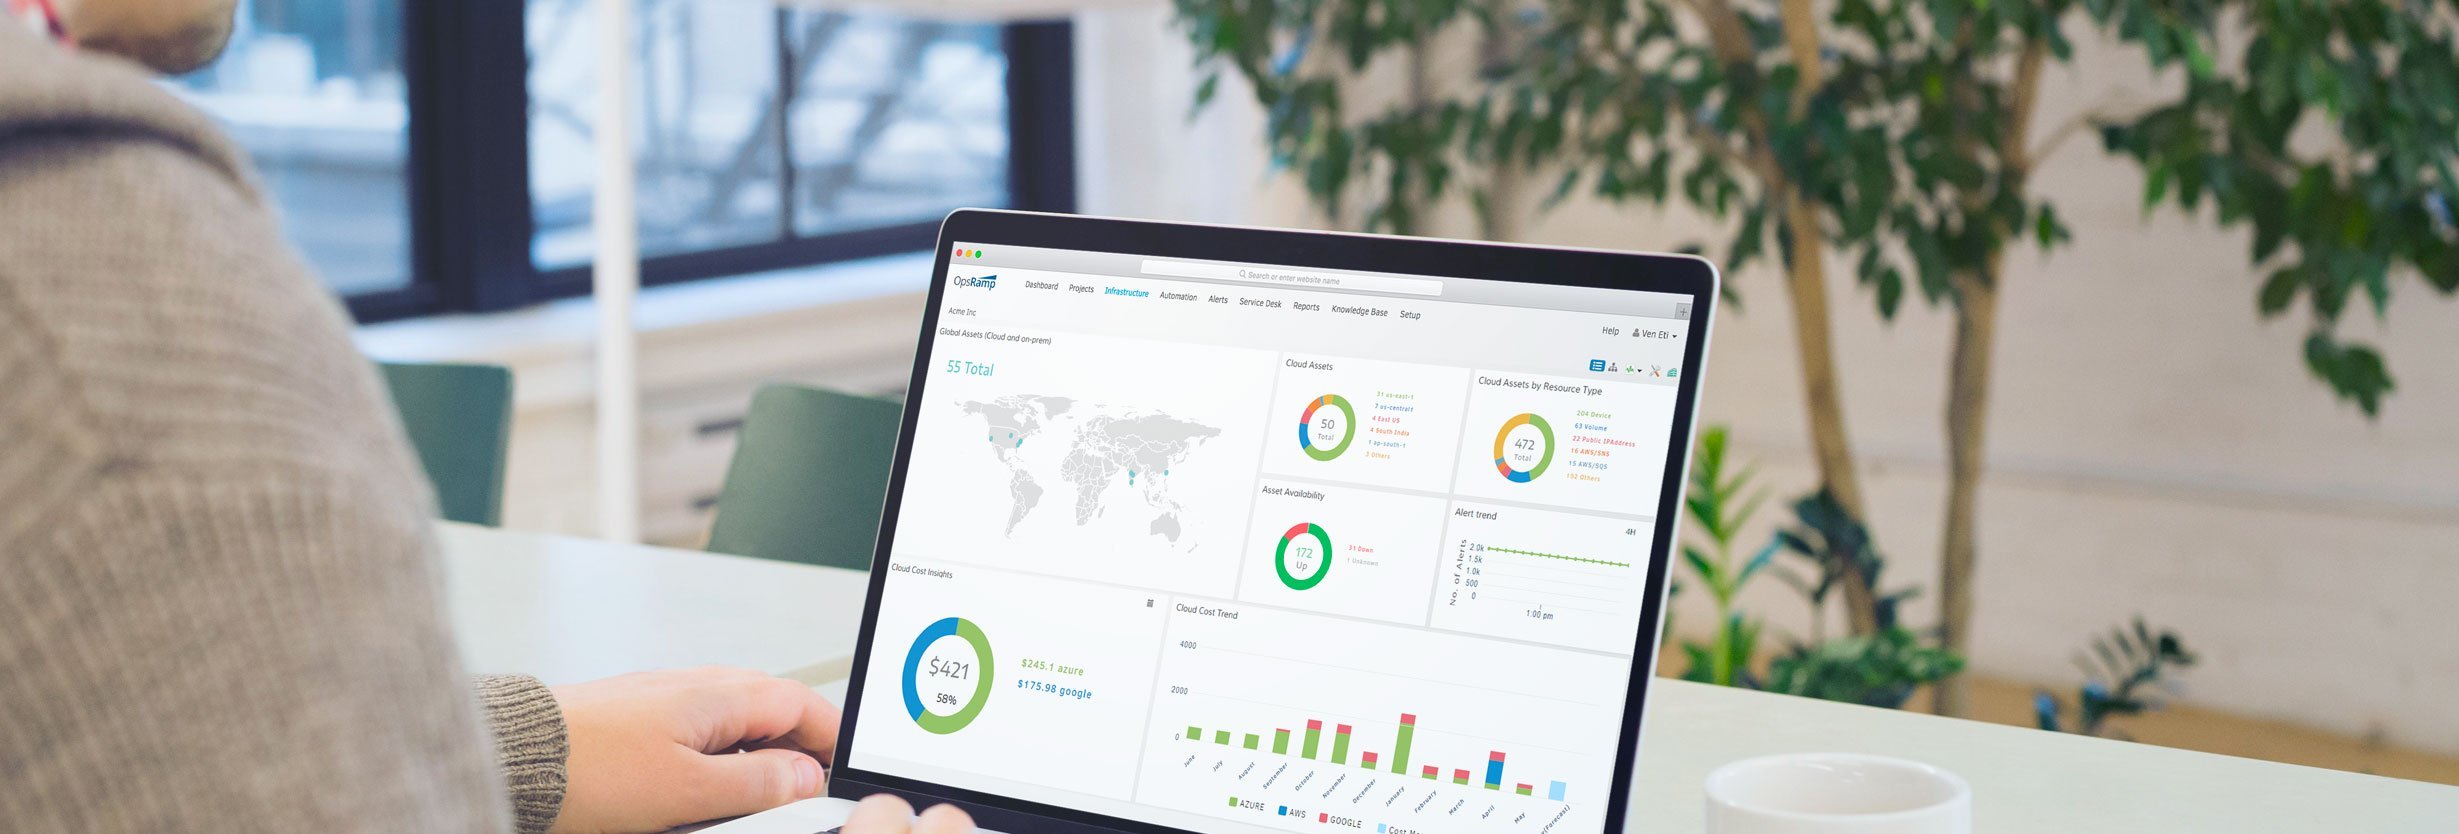 Build A Data-Driven Culture For Digital Operations Management With OpsRamp's Role-Based Dashboards